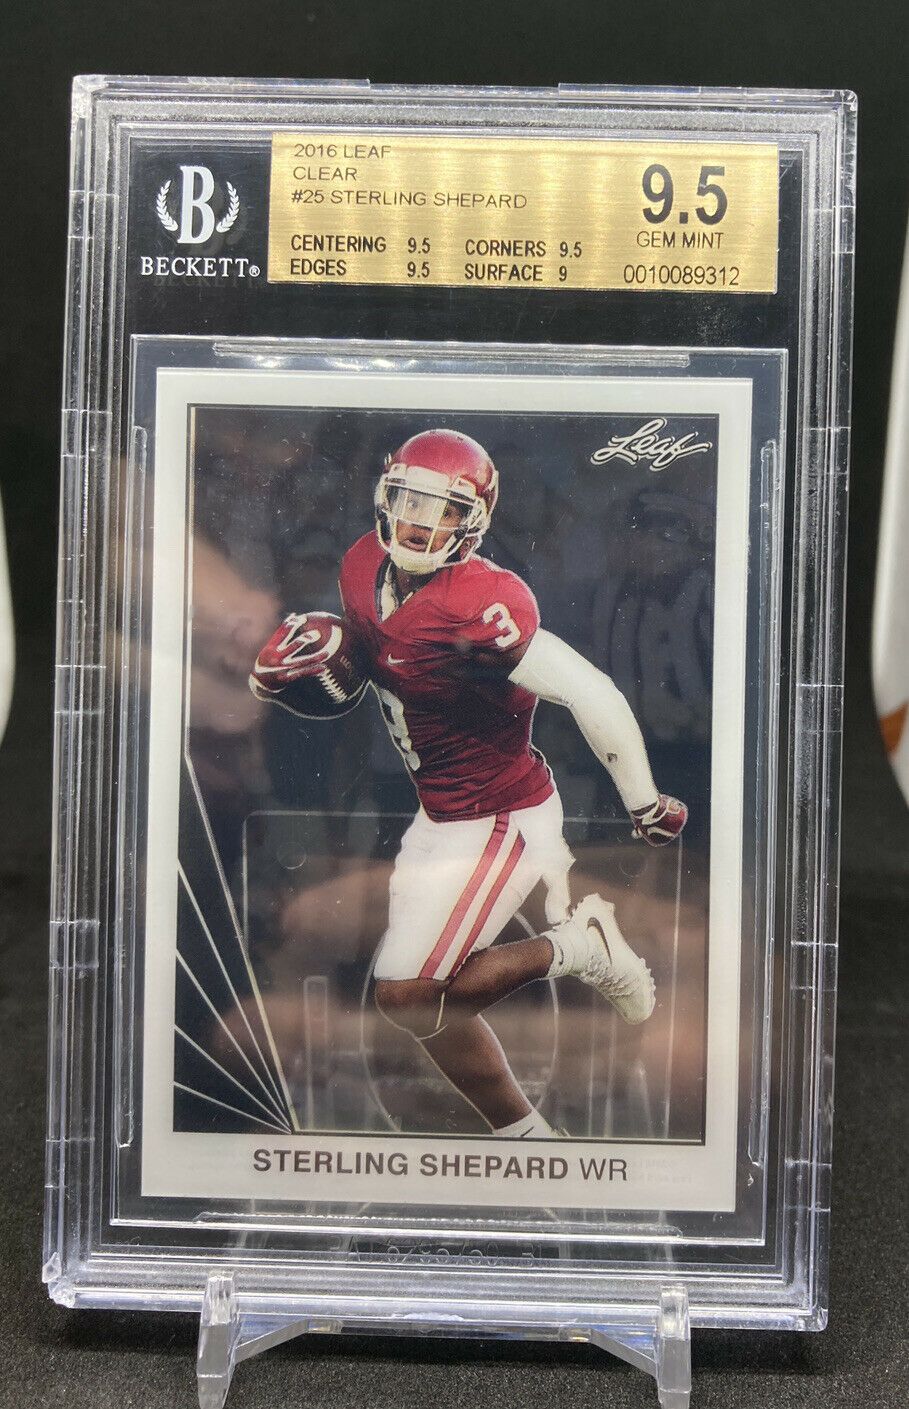 2016 Leaf Clear Sterling Shepard Rookie #25 (BGS 9.5) *BGS CASE CHIPPED COR